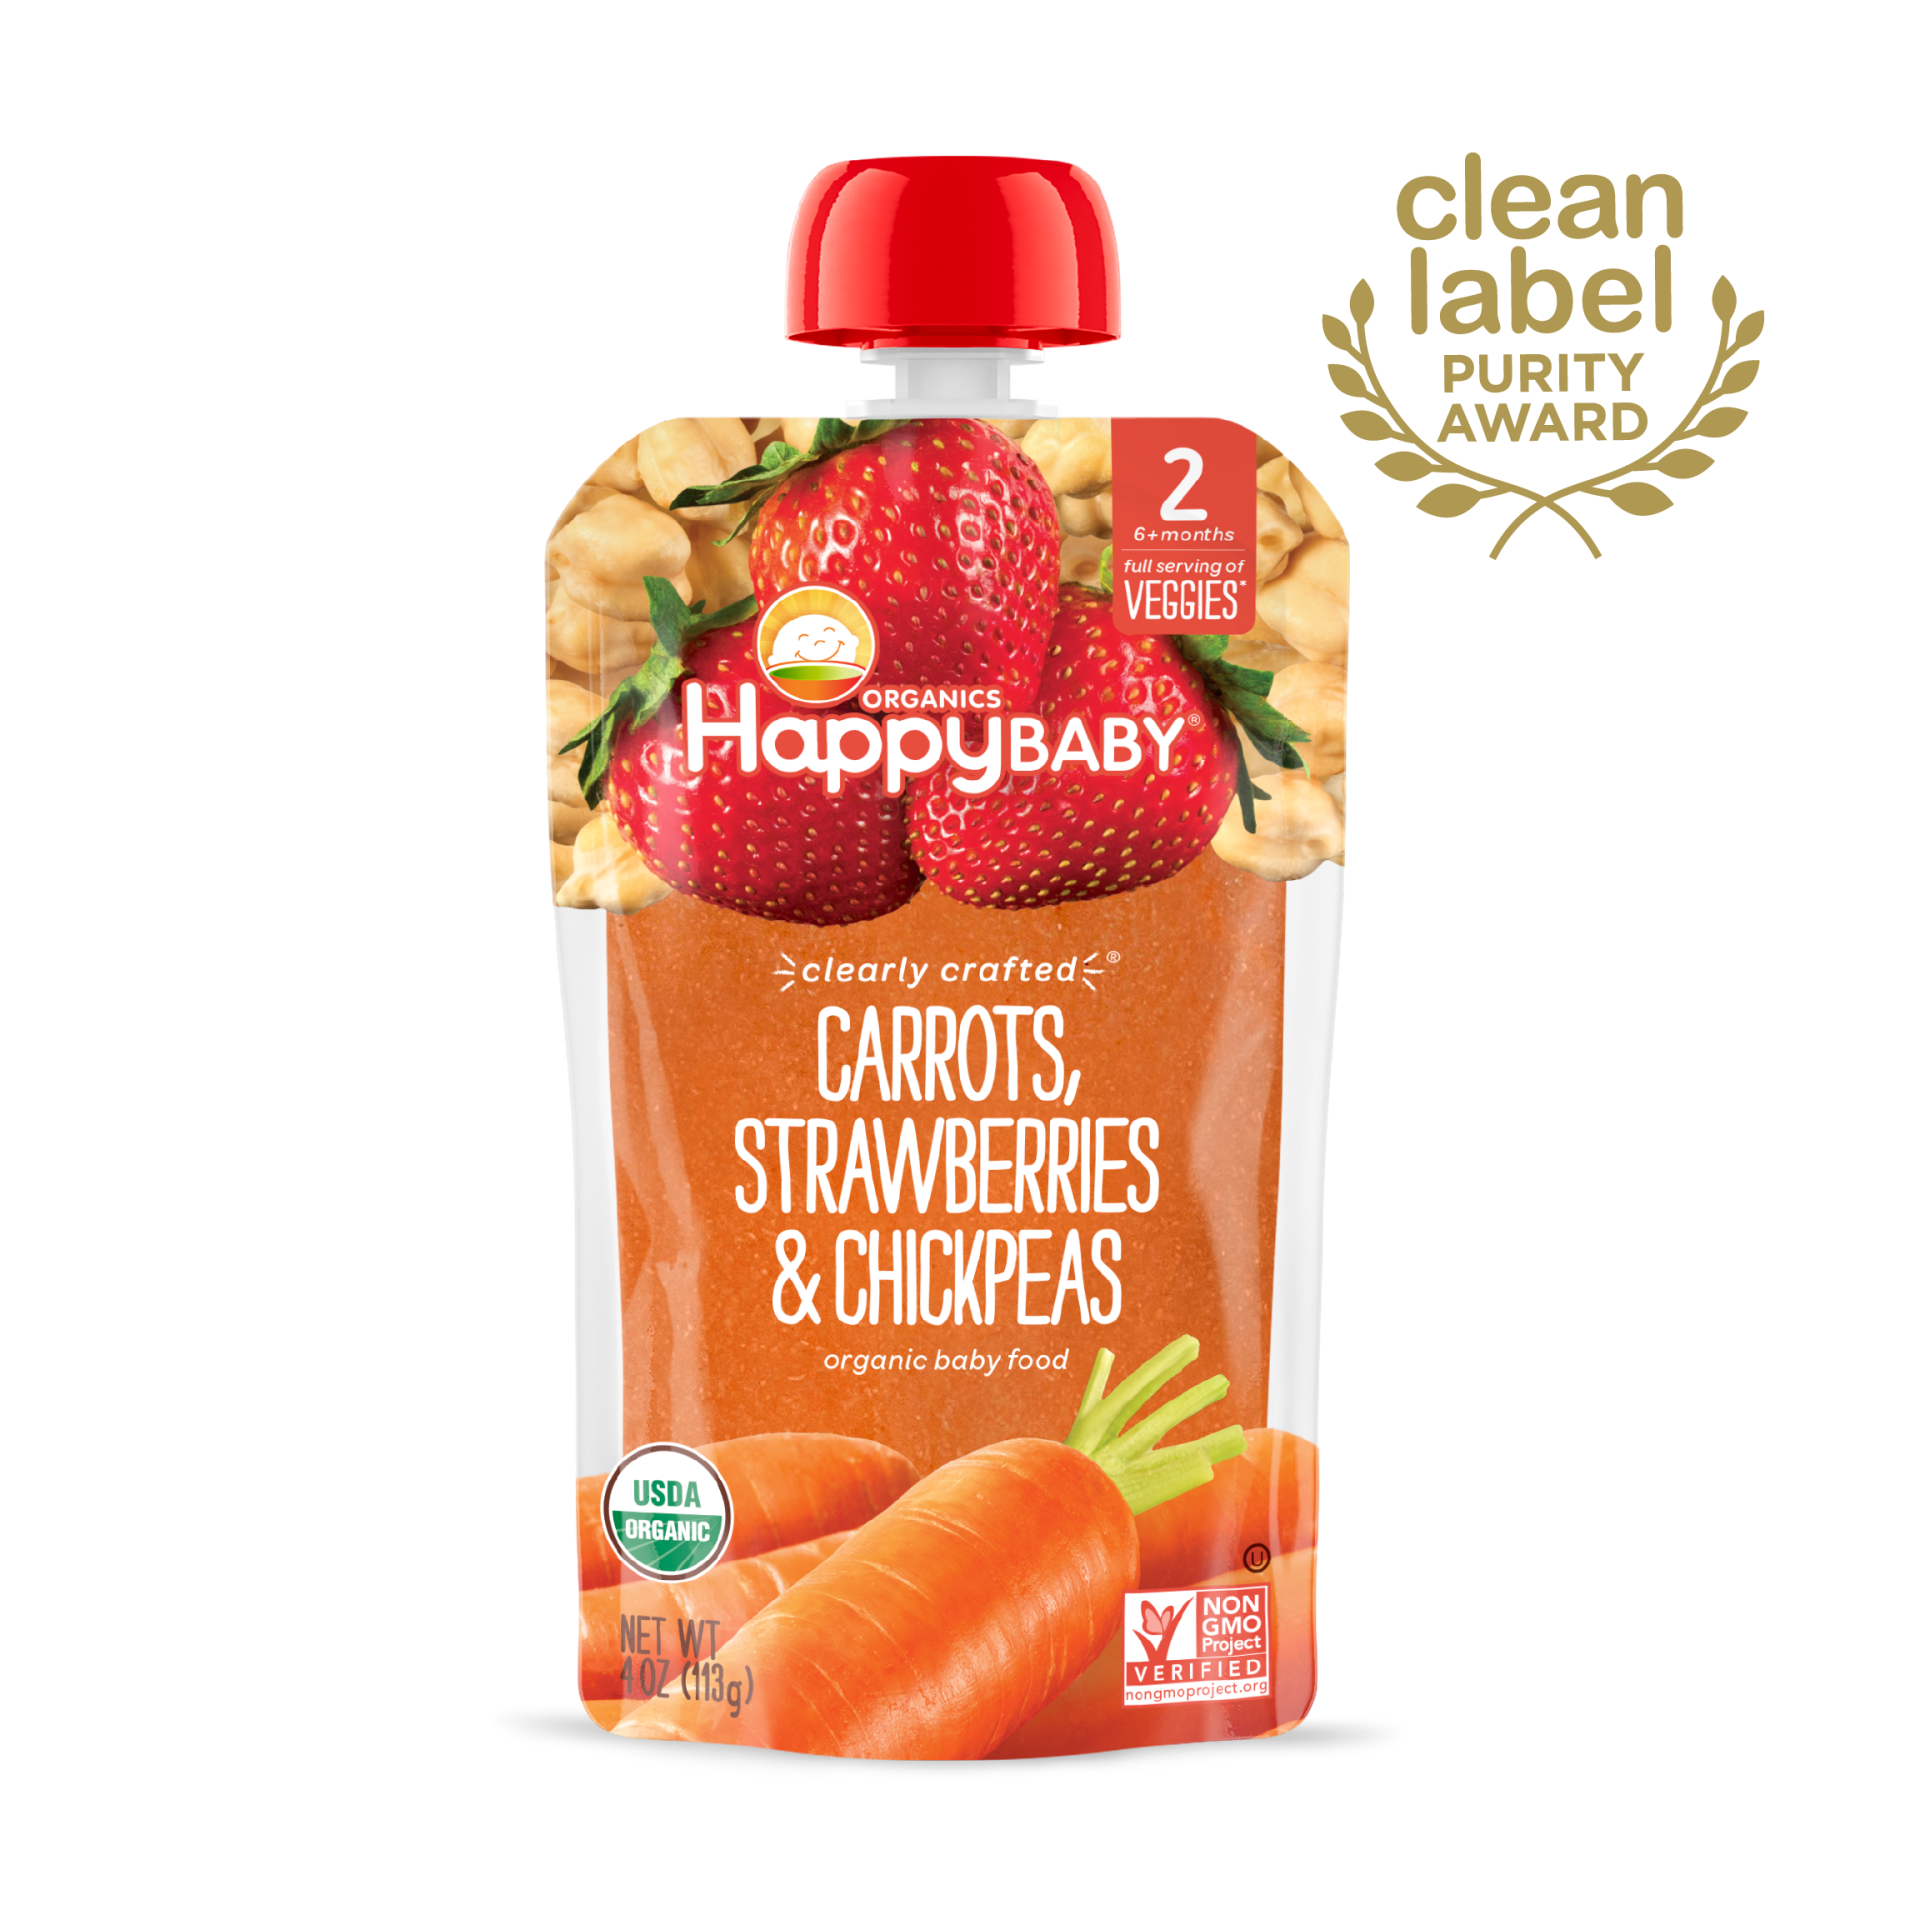 Happy Baby S2 - Clearly Crafted Carrots Strawberries & Chickpeas 4oz pouch 16 units per case 4.0 oz